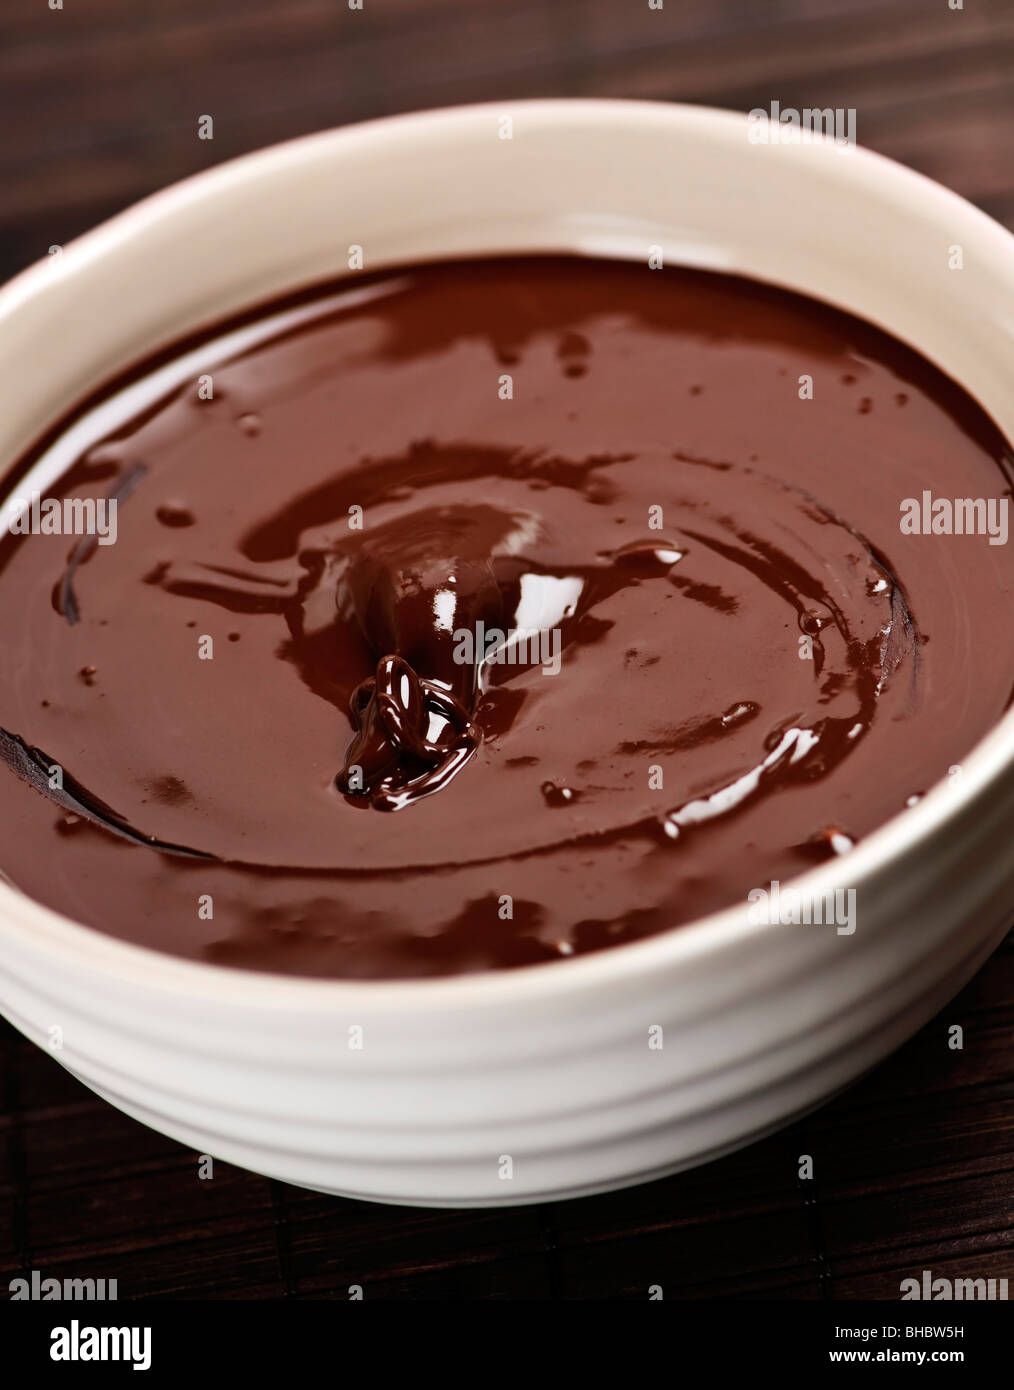 Bowl of soft melted rich dark chocolate Stock Photo